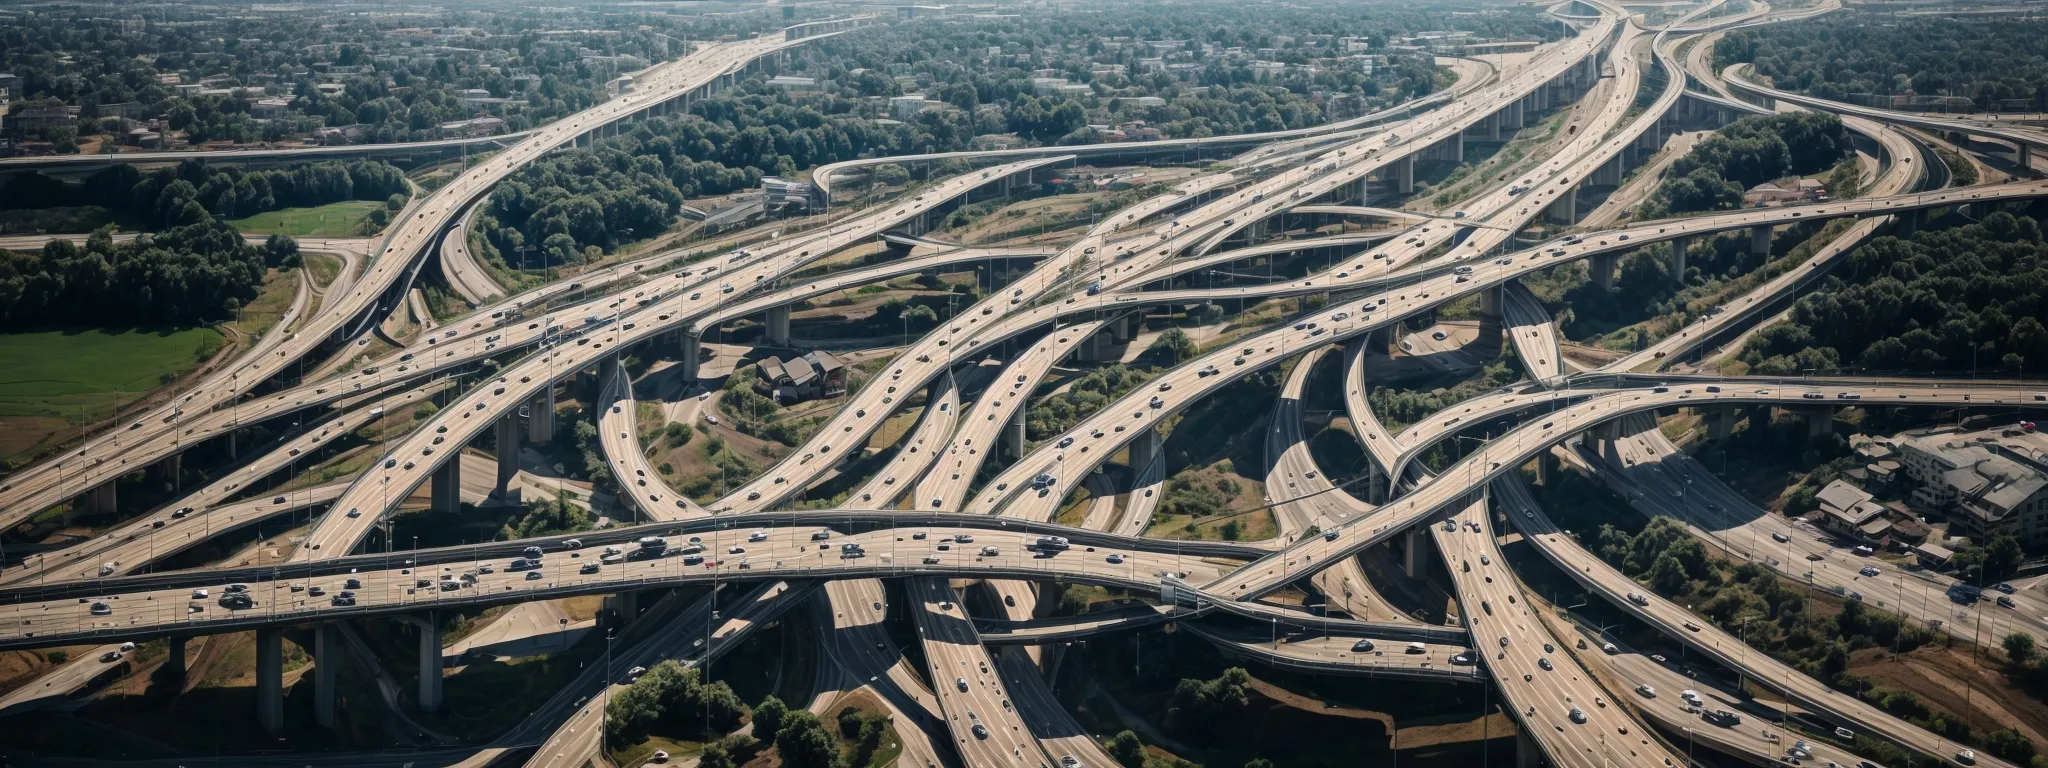 a highway interchange bustling with vehicles illustrating the flow of traffic under evaluation for an seo return on investment analysis.